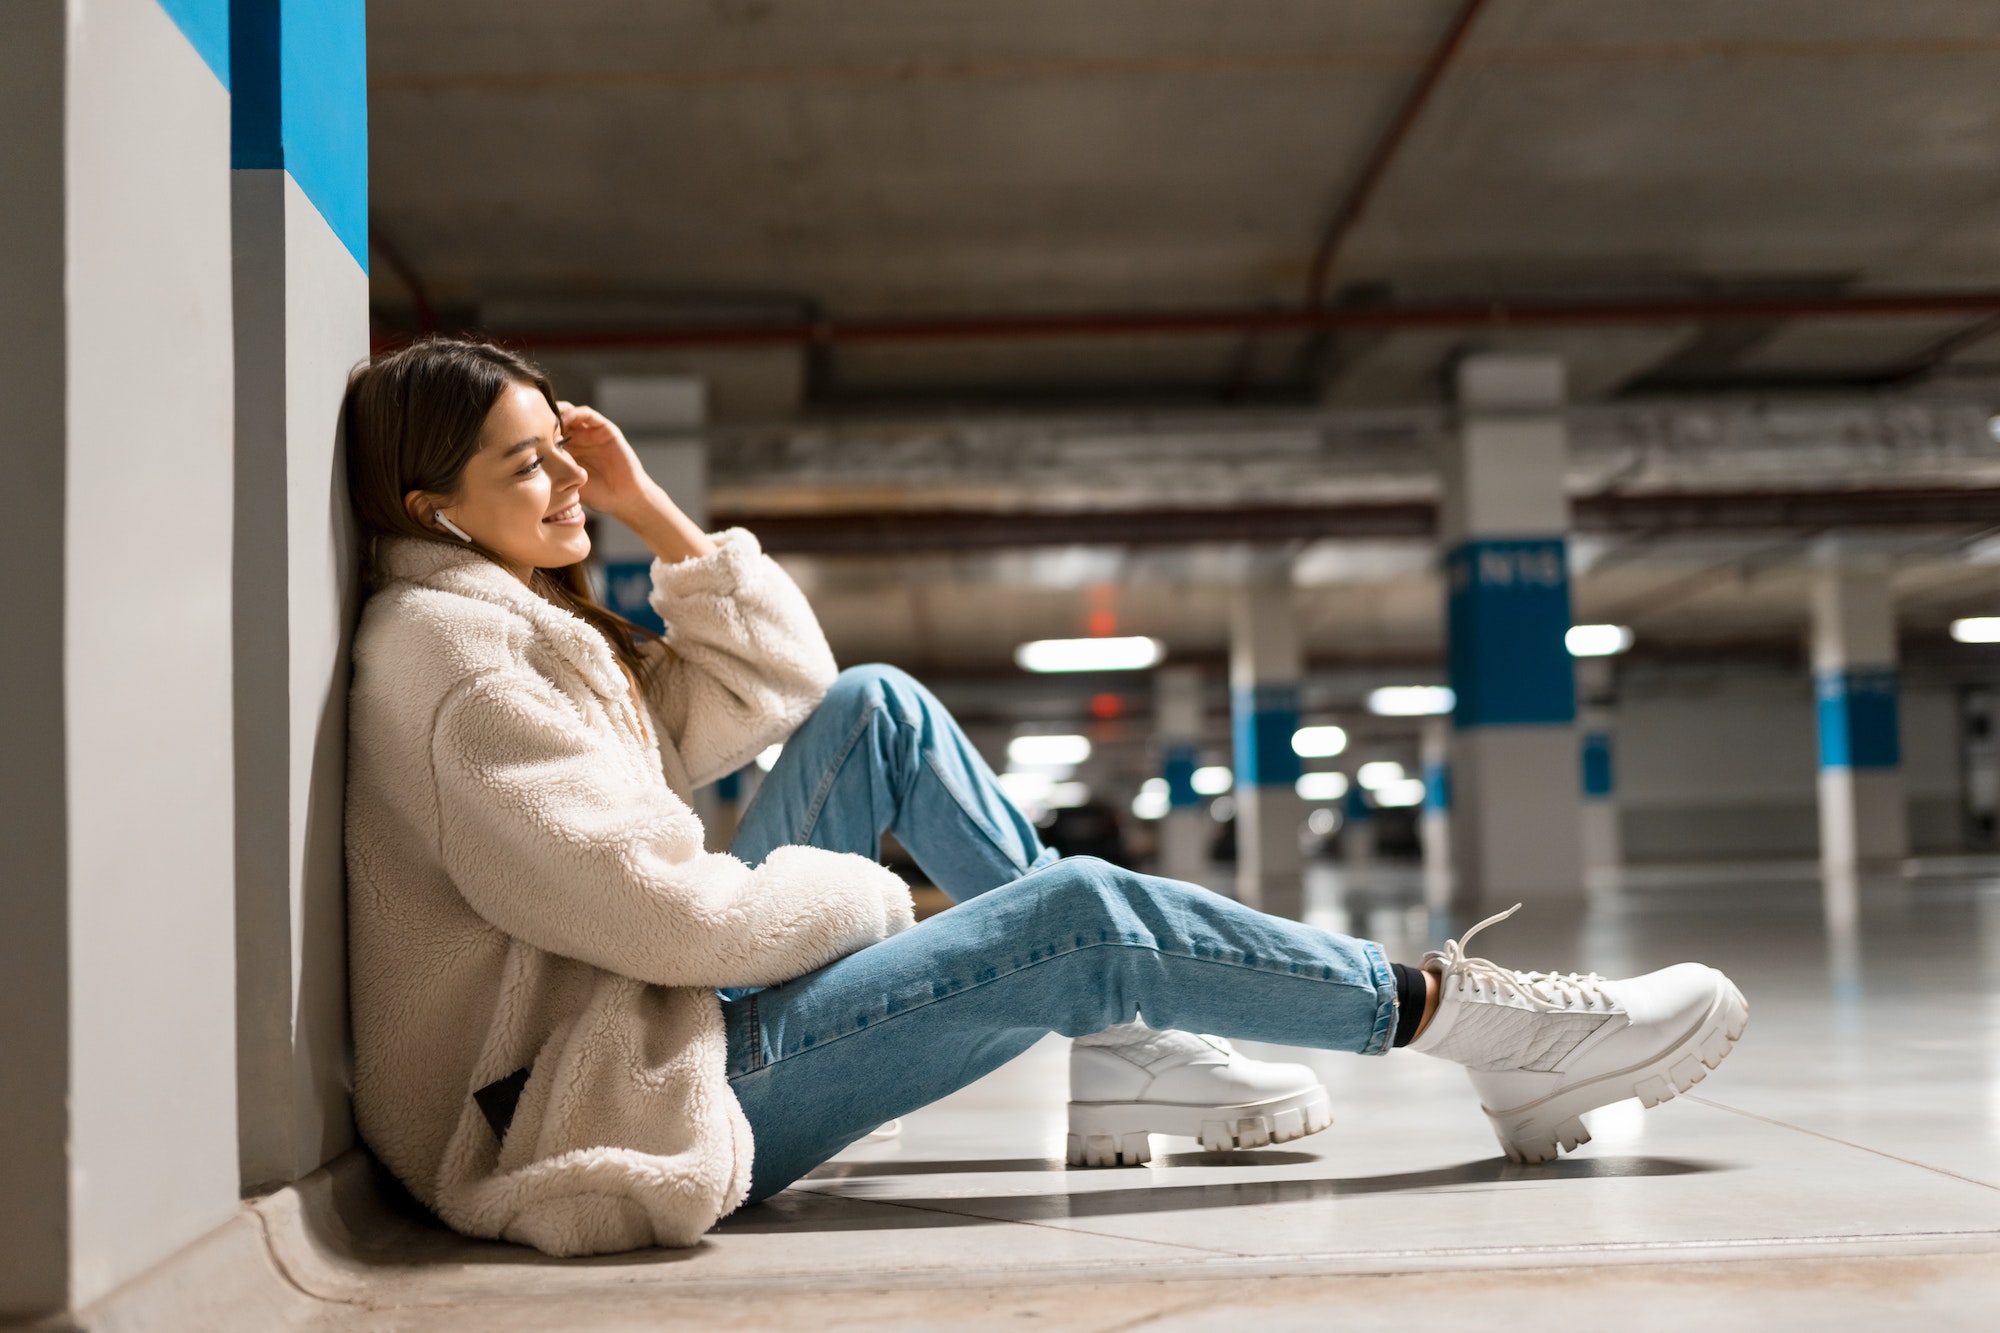 Fashionable girl sits on the floor of underground parking with wireless headphones